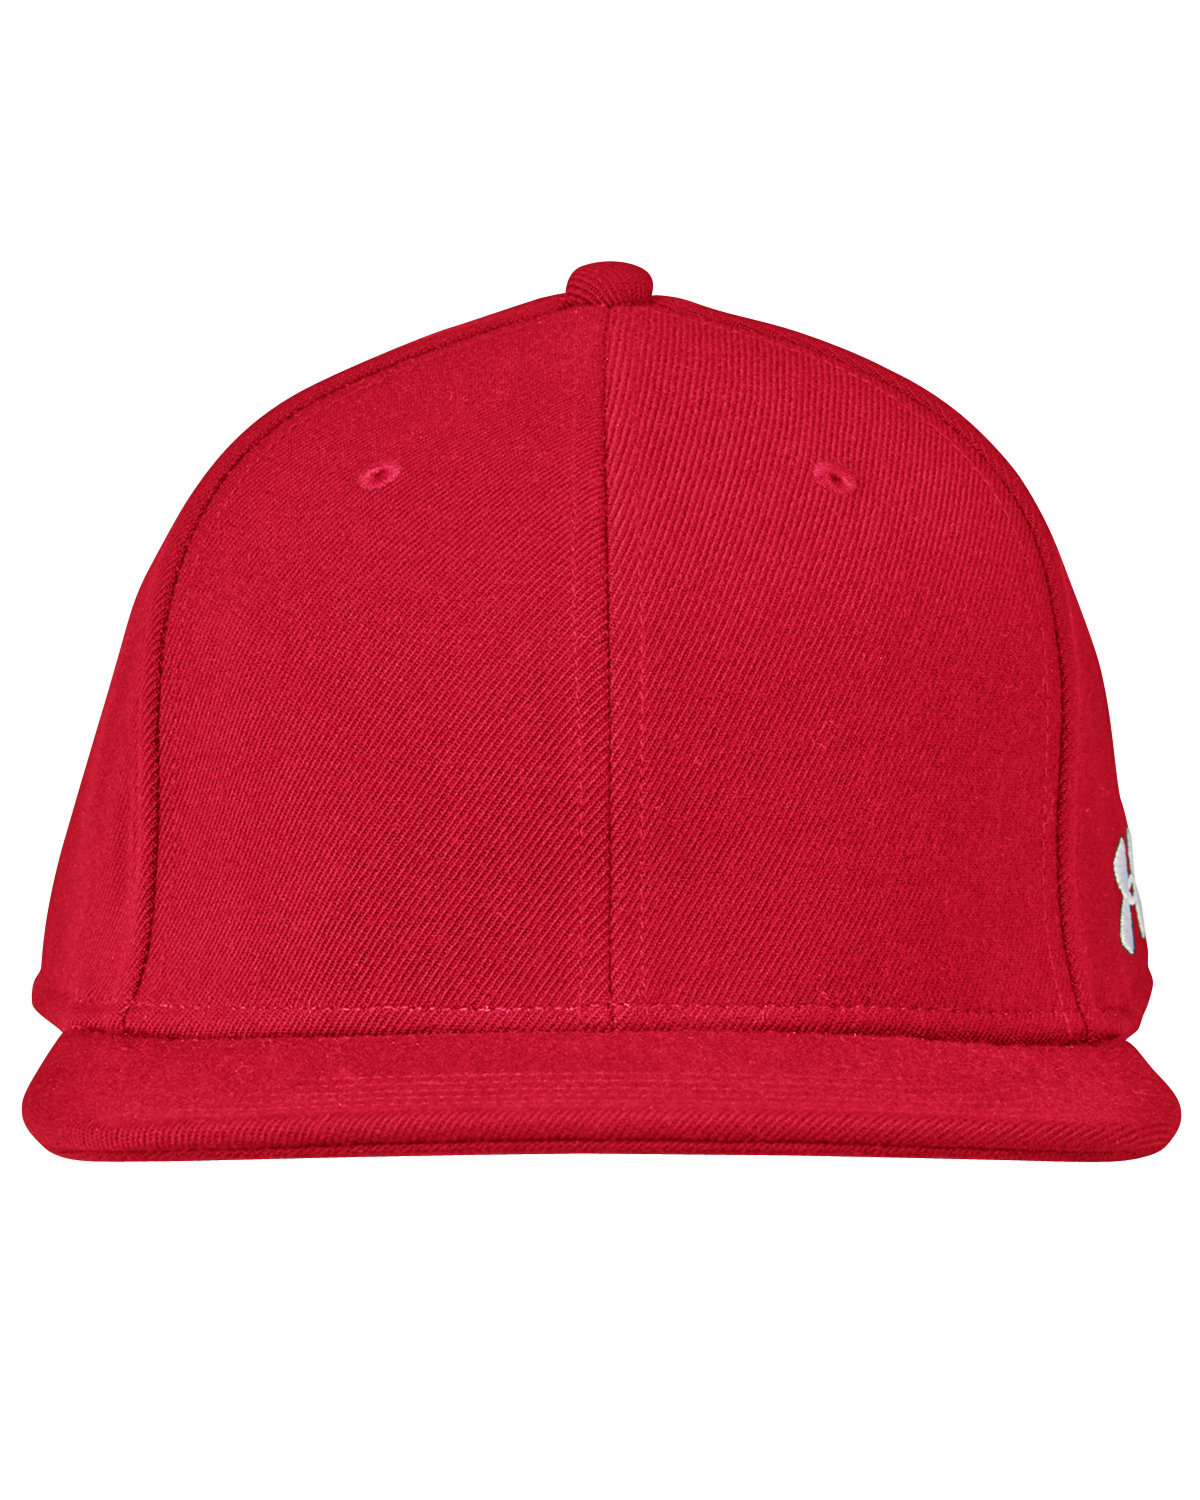 Under Armour SuperSale Flat Bill Cap- Solid CRD RD/ WH _62 